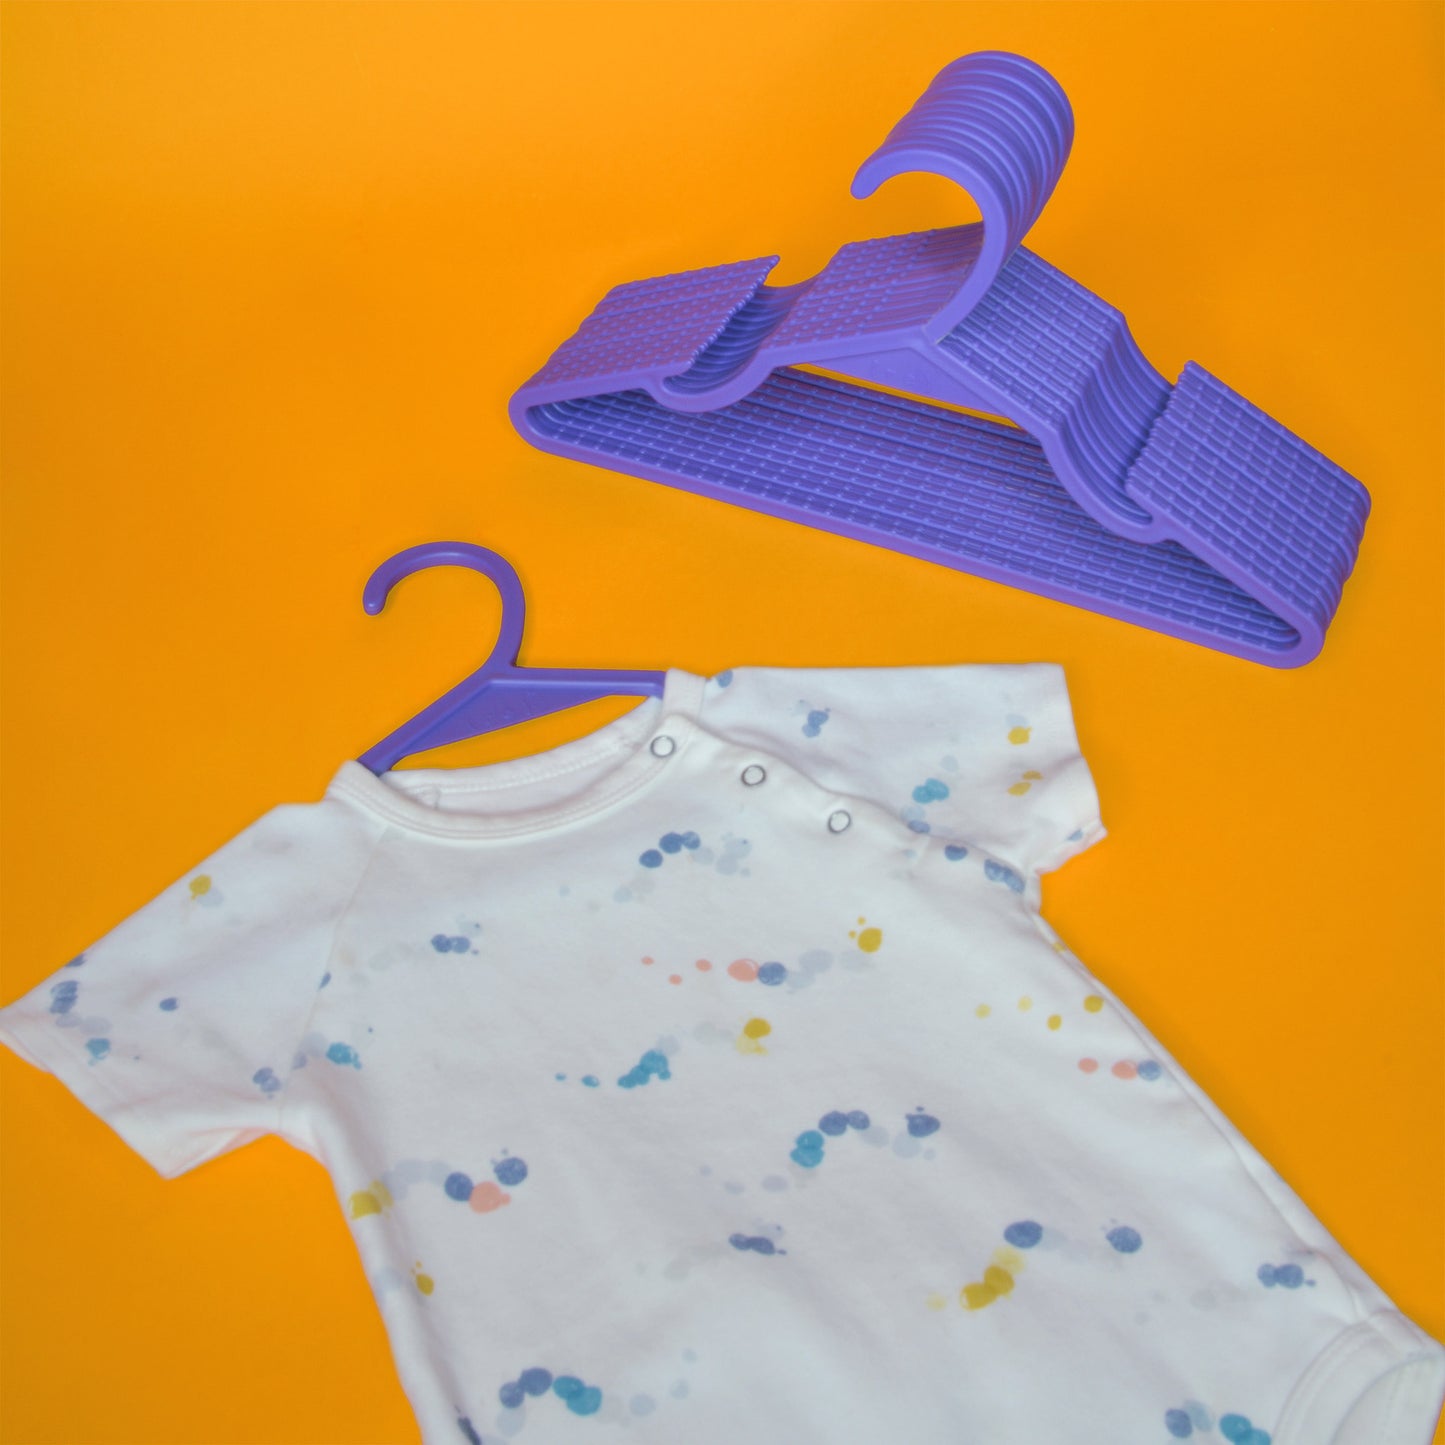 A colorful polka dot baby onesie with a set of bright purple kids hangers made from recycled ocean plastic